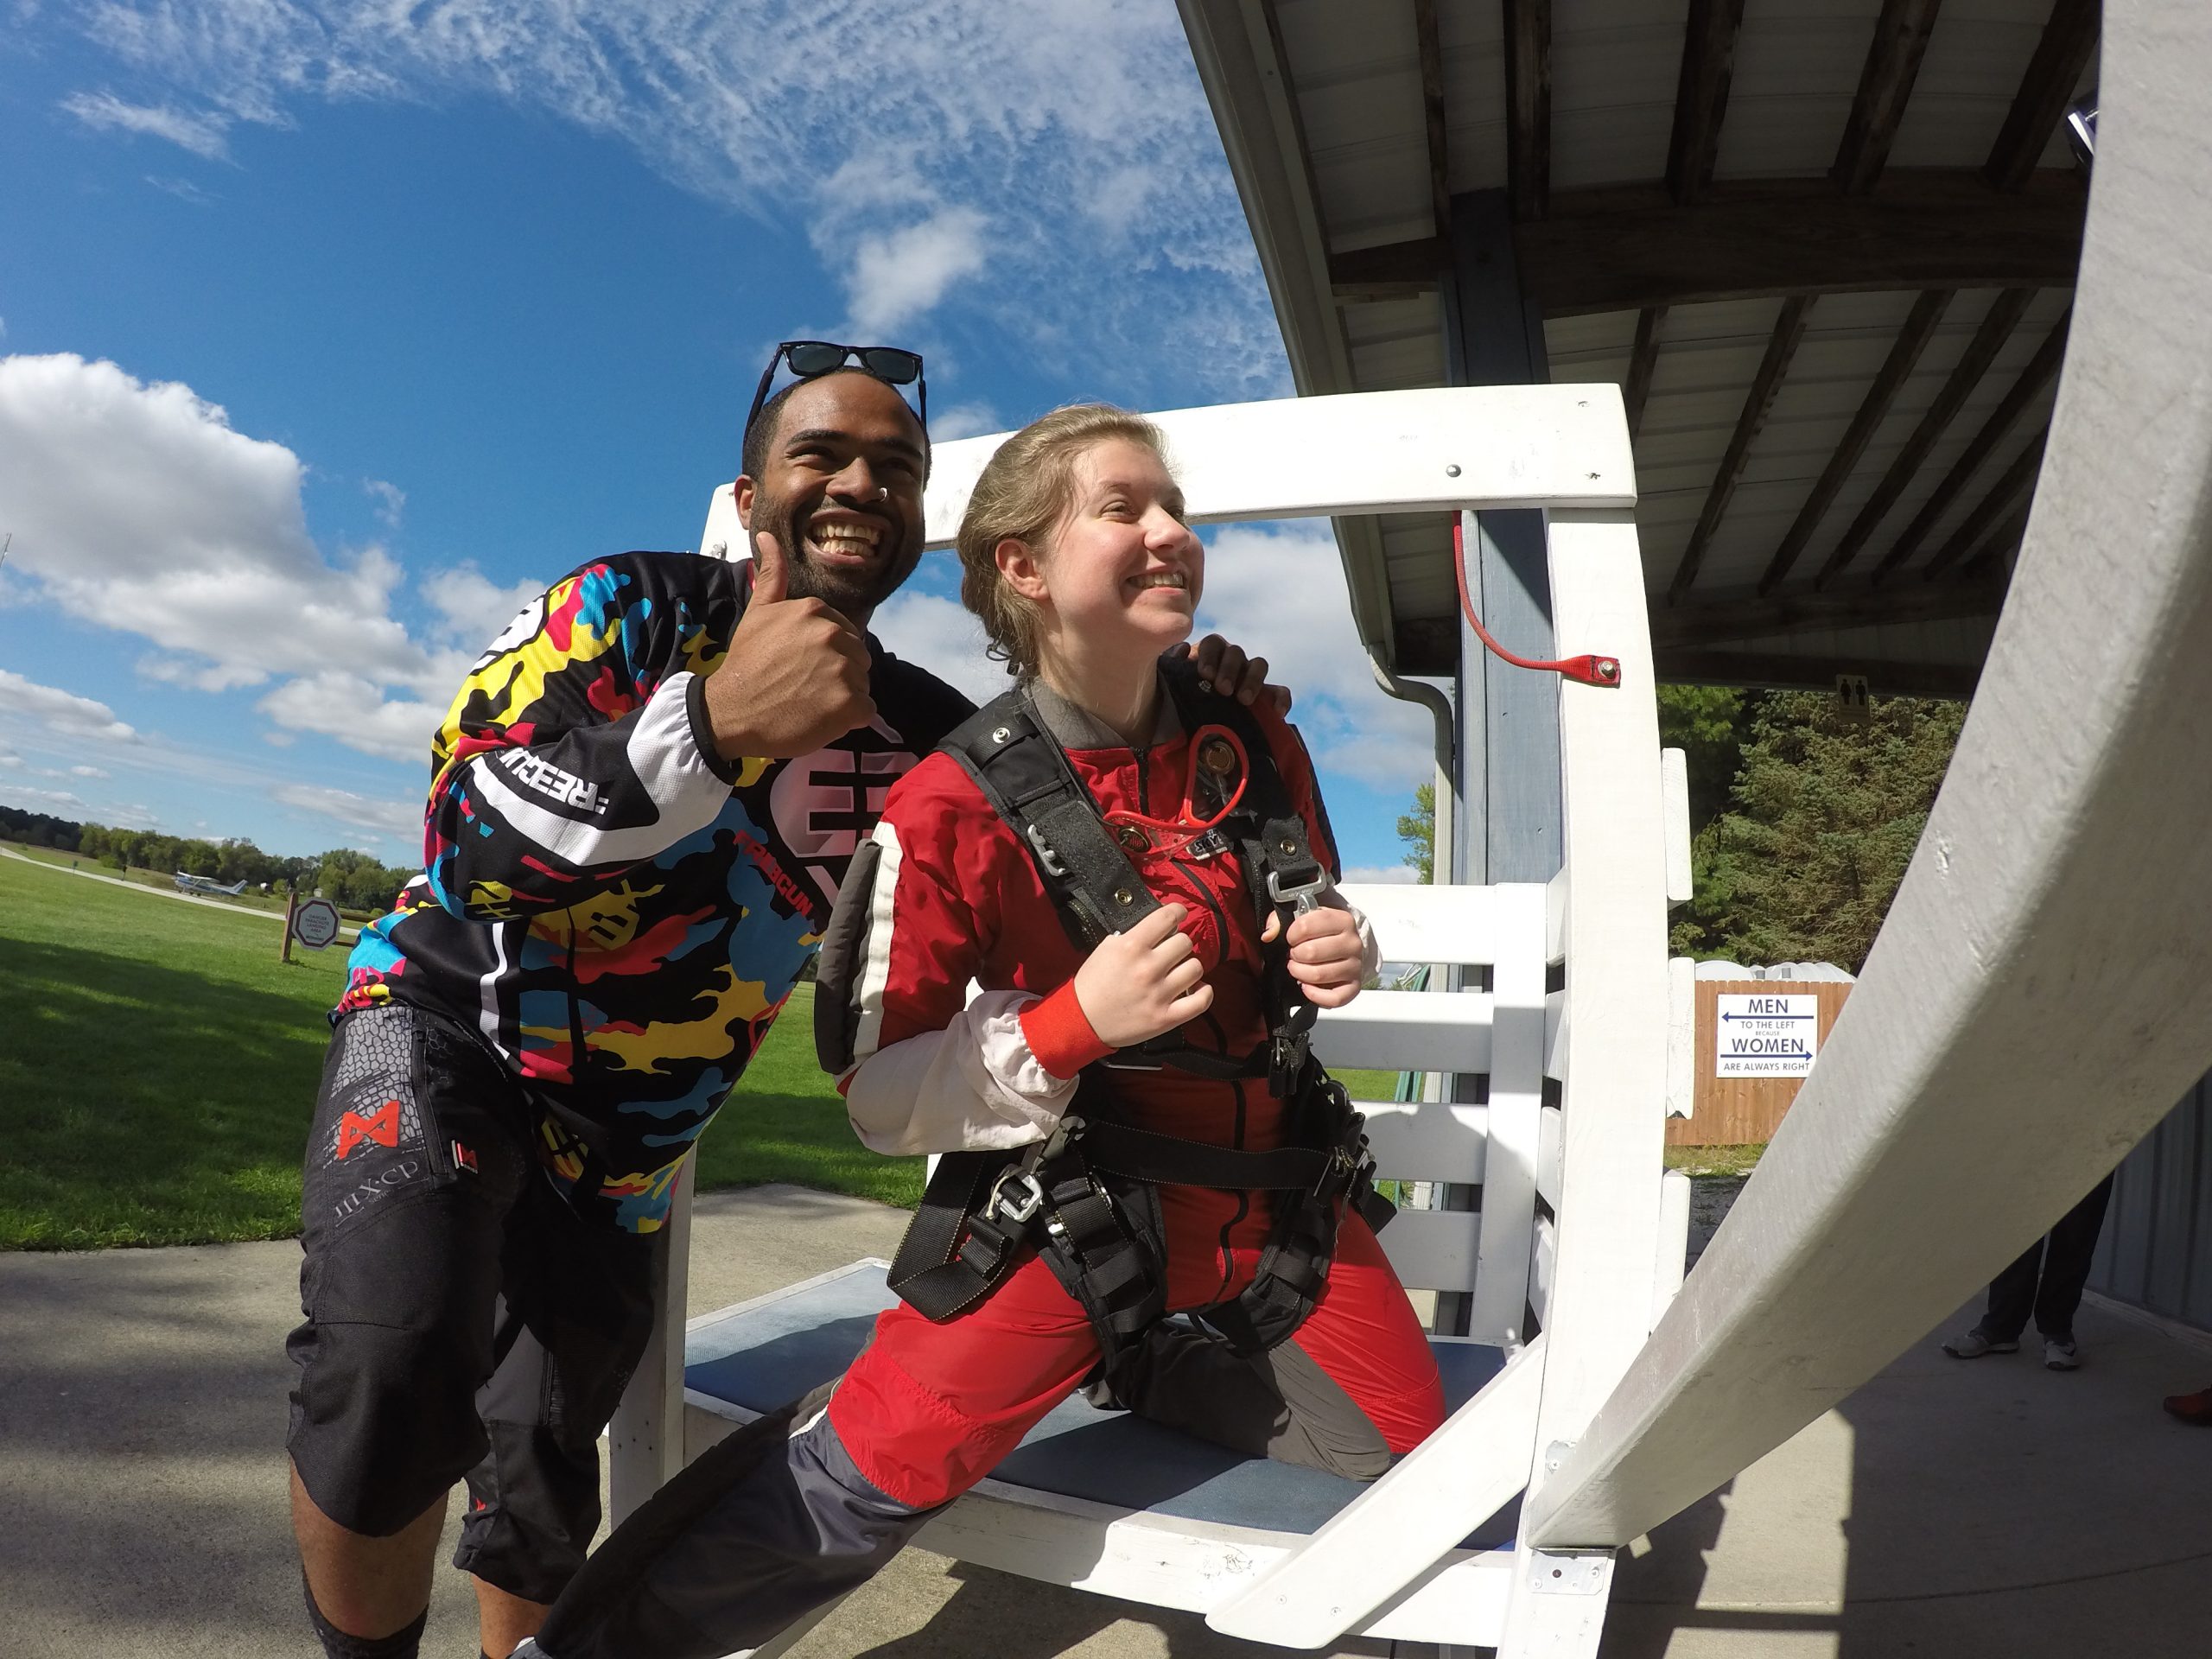 First time skydiver training for jumping from a plane at Wisconsin Skydiving Center near Madison